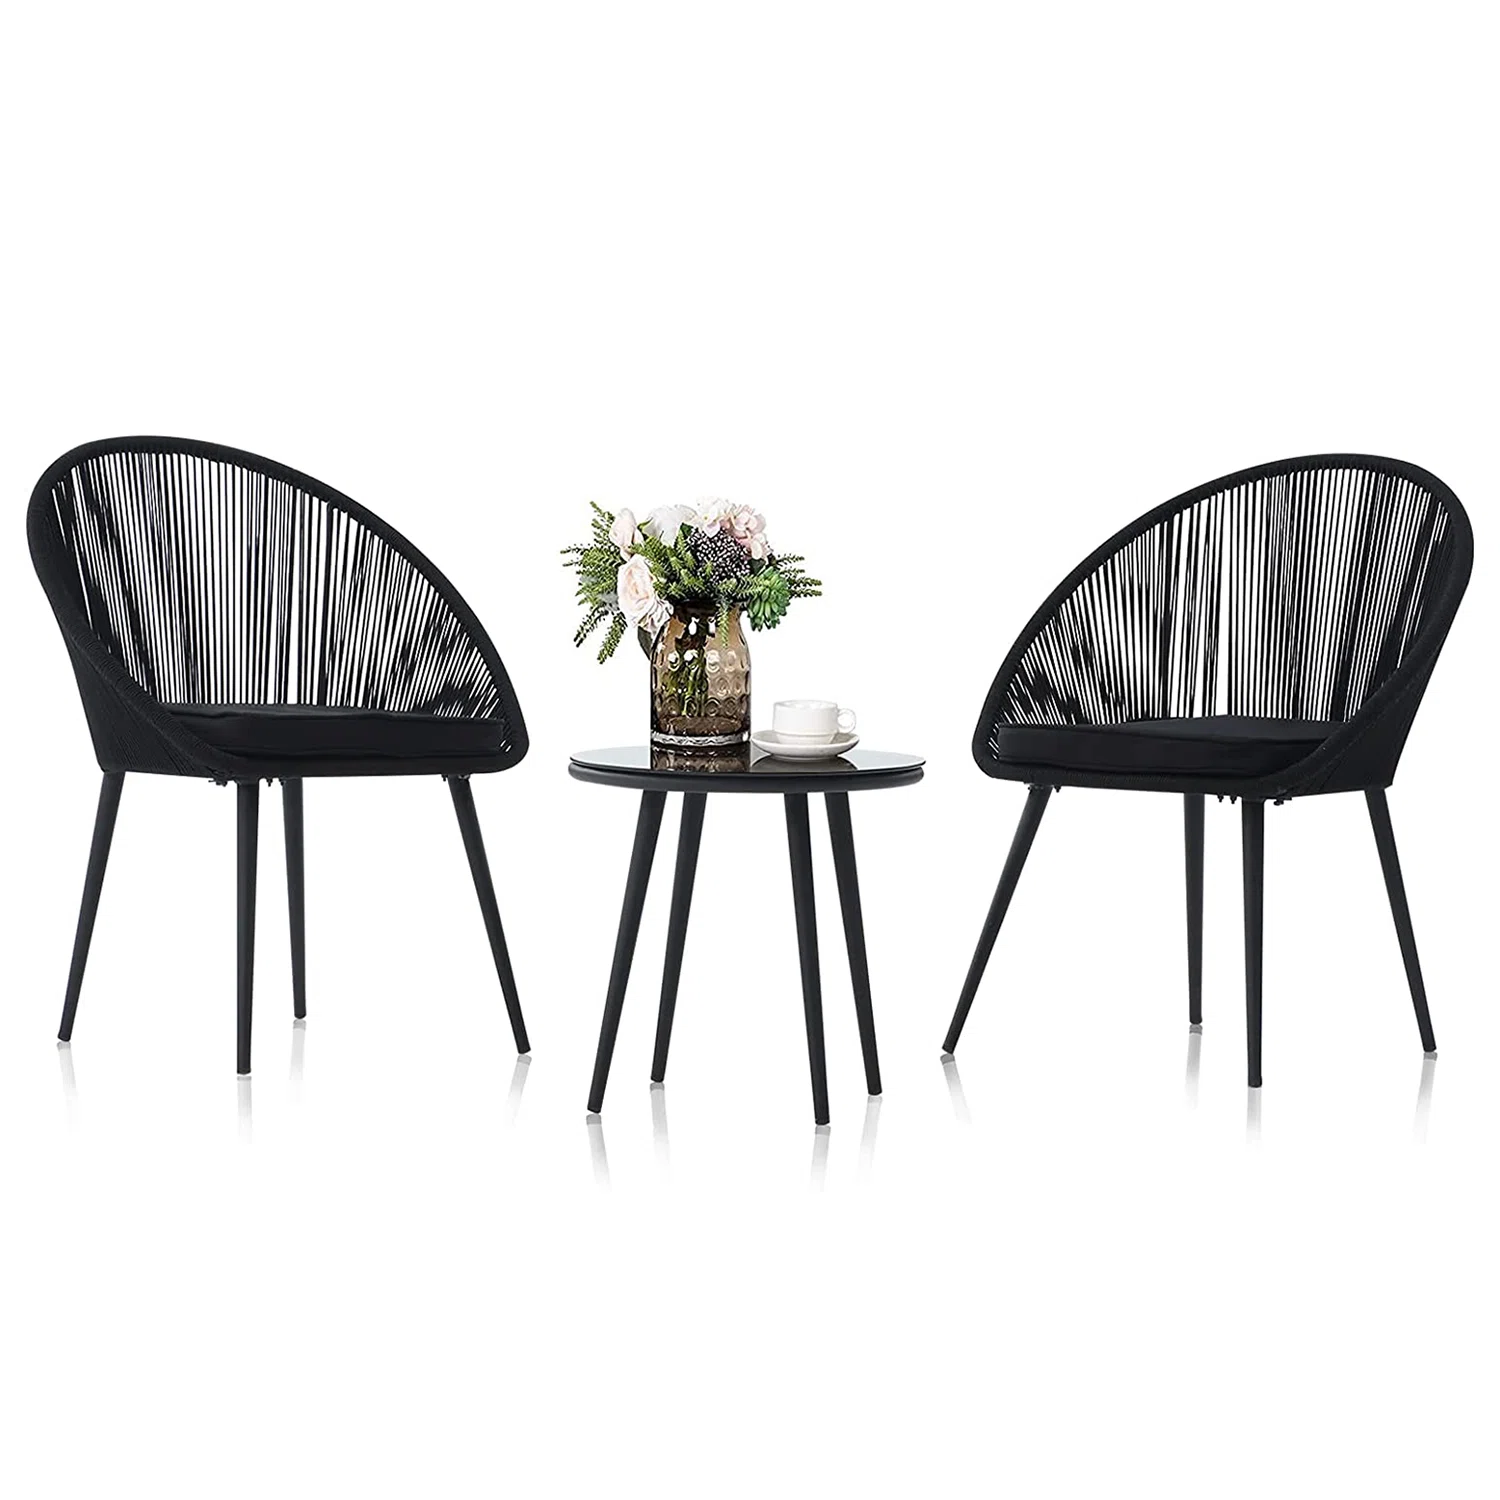 Kaay Outdoor Patio Seating Set 2 Chairs and 1 Table Set (Black)